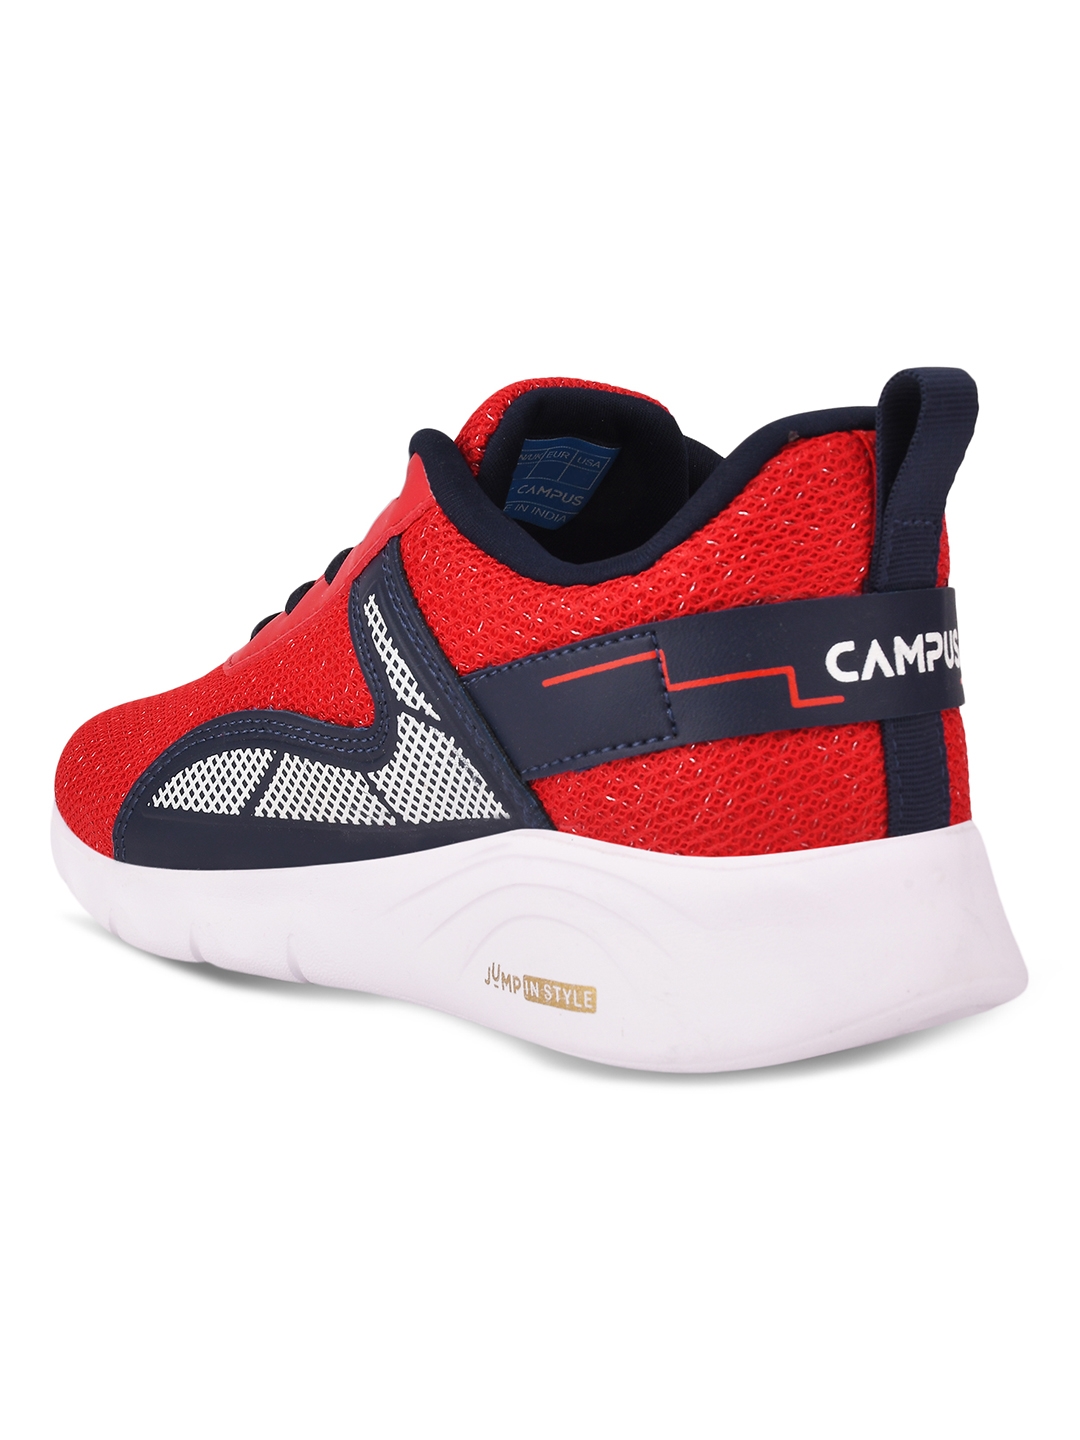 Campus Shoes | CAMP RENLY JR